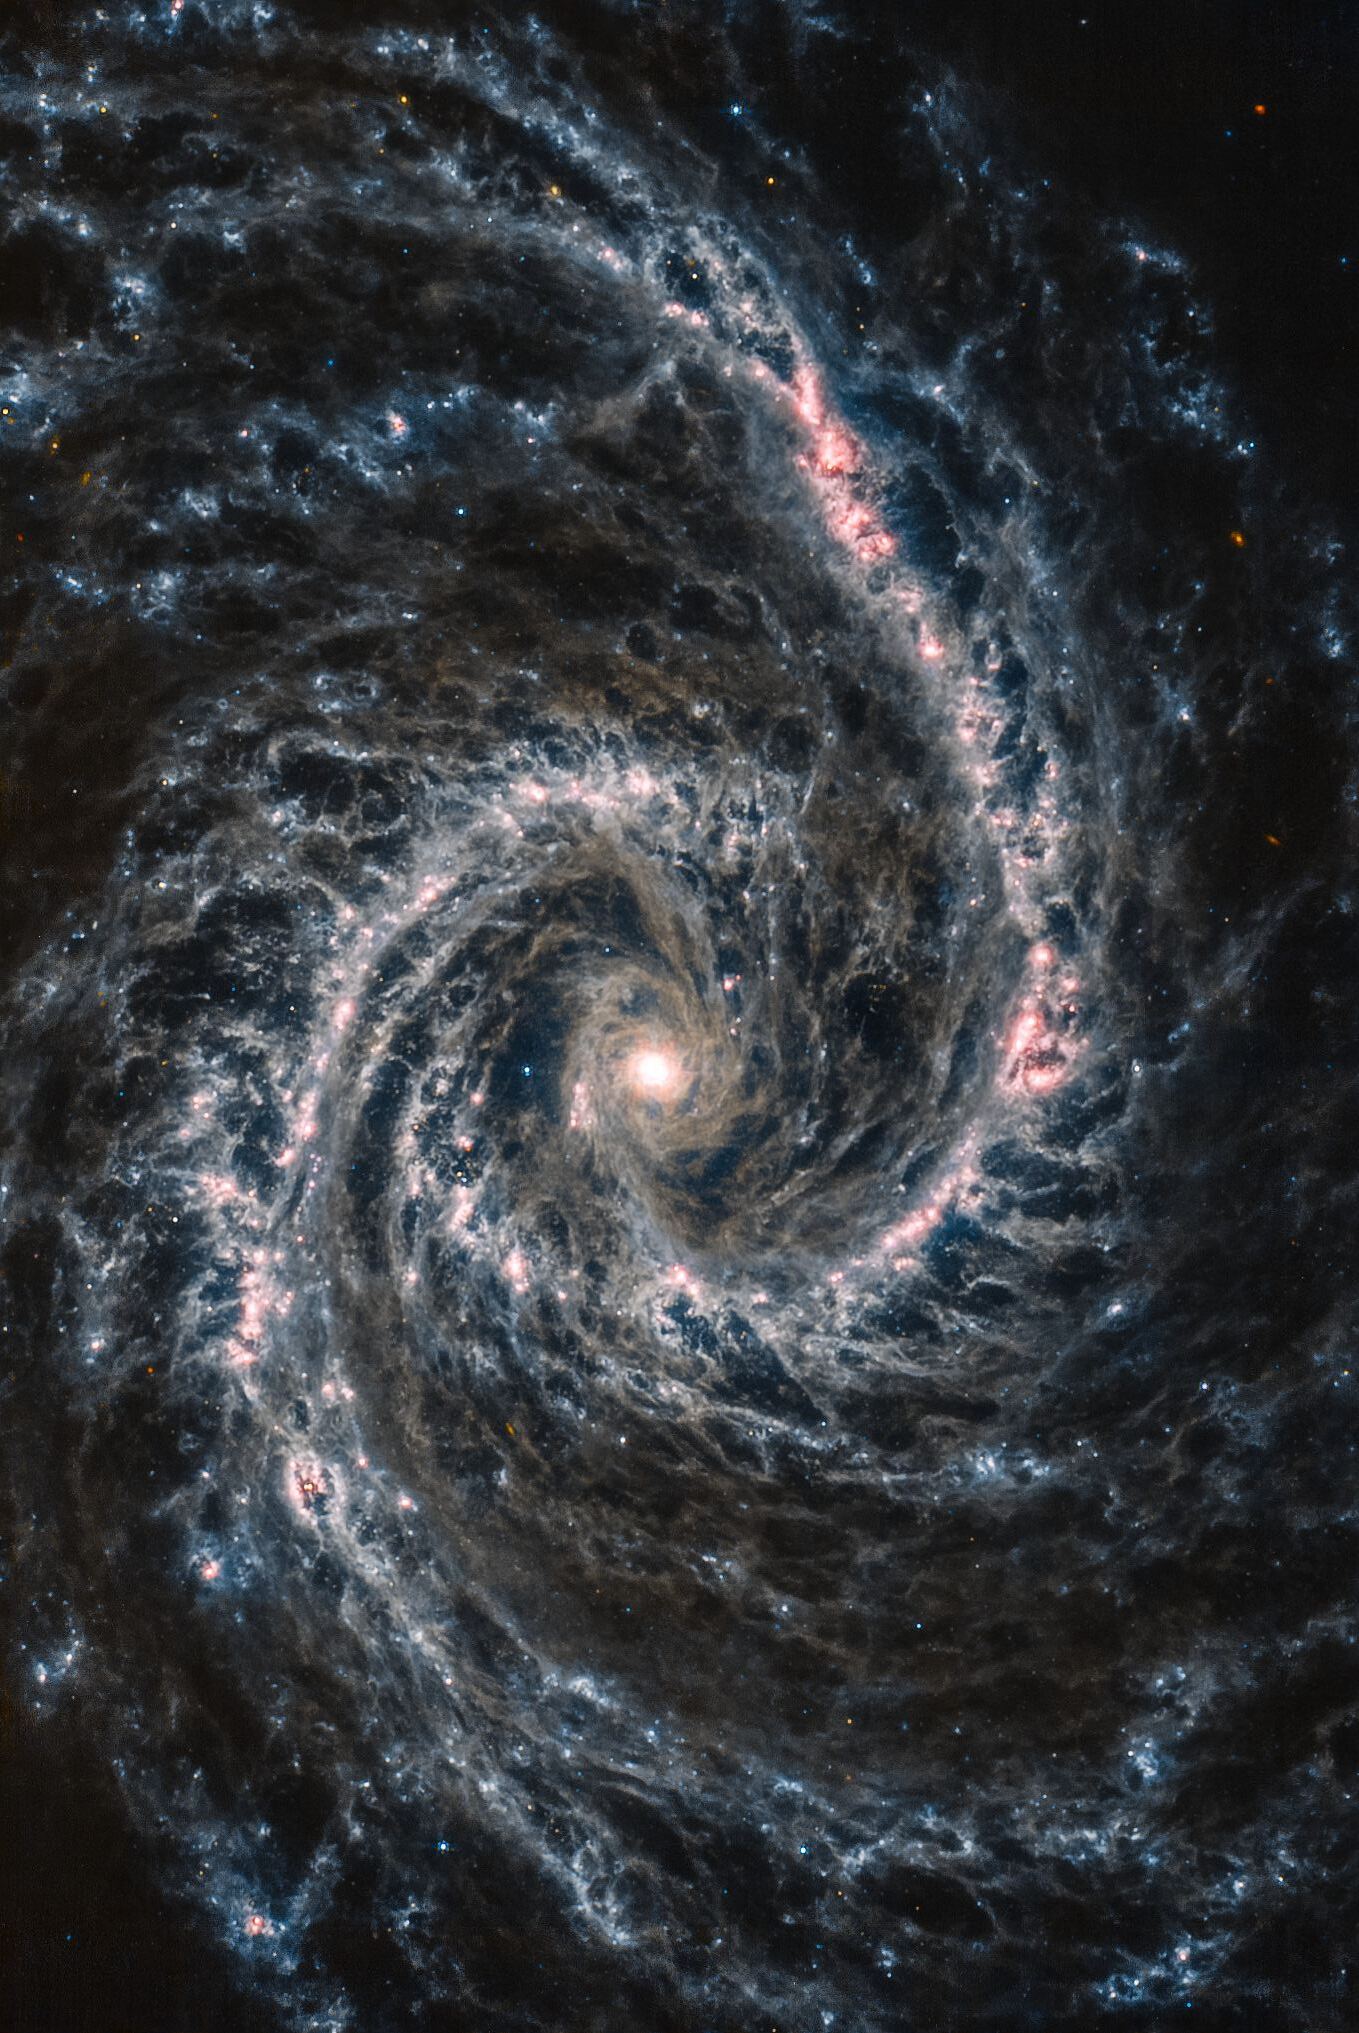 Gaze Slack-jawed at the Haunting Beauty of Galaxy NGC 1566, Captured by JWST, Pr..